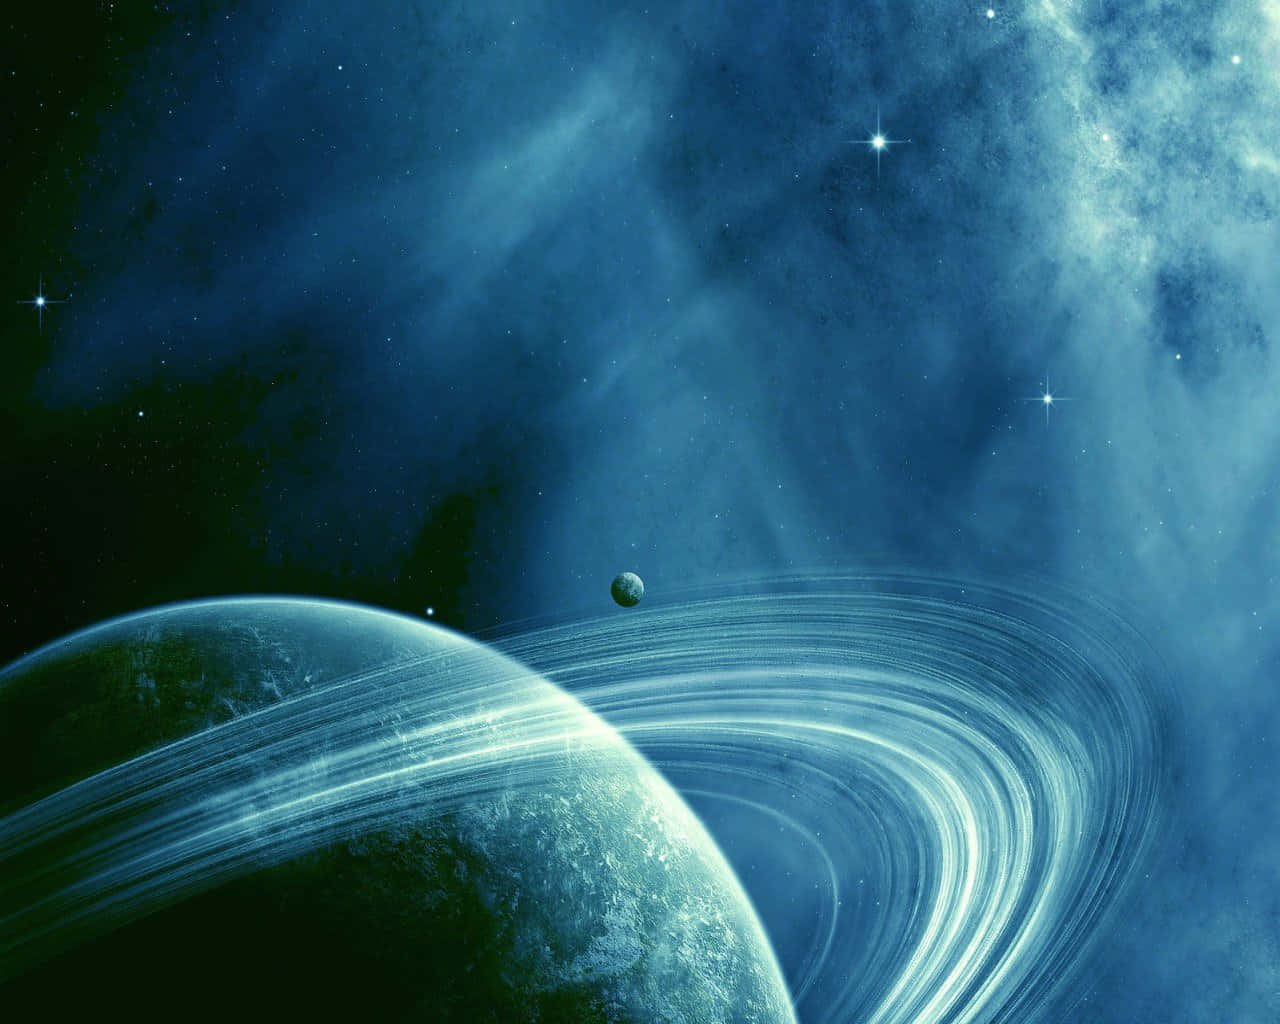 A Planet In Space With Rings Around It Wallpaper